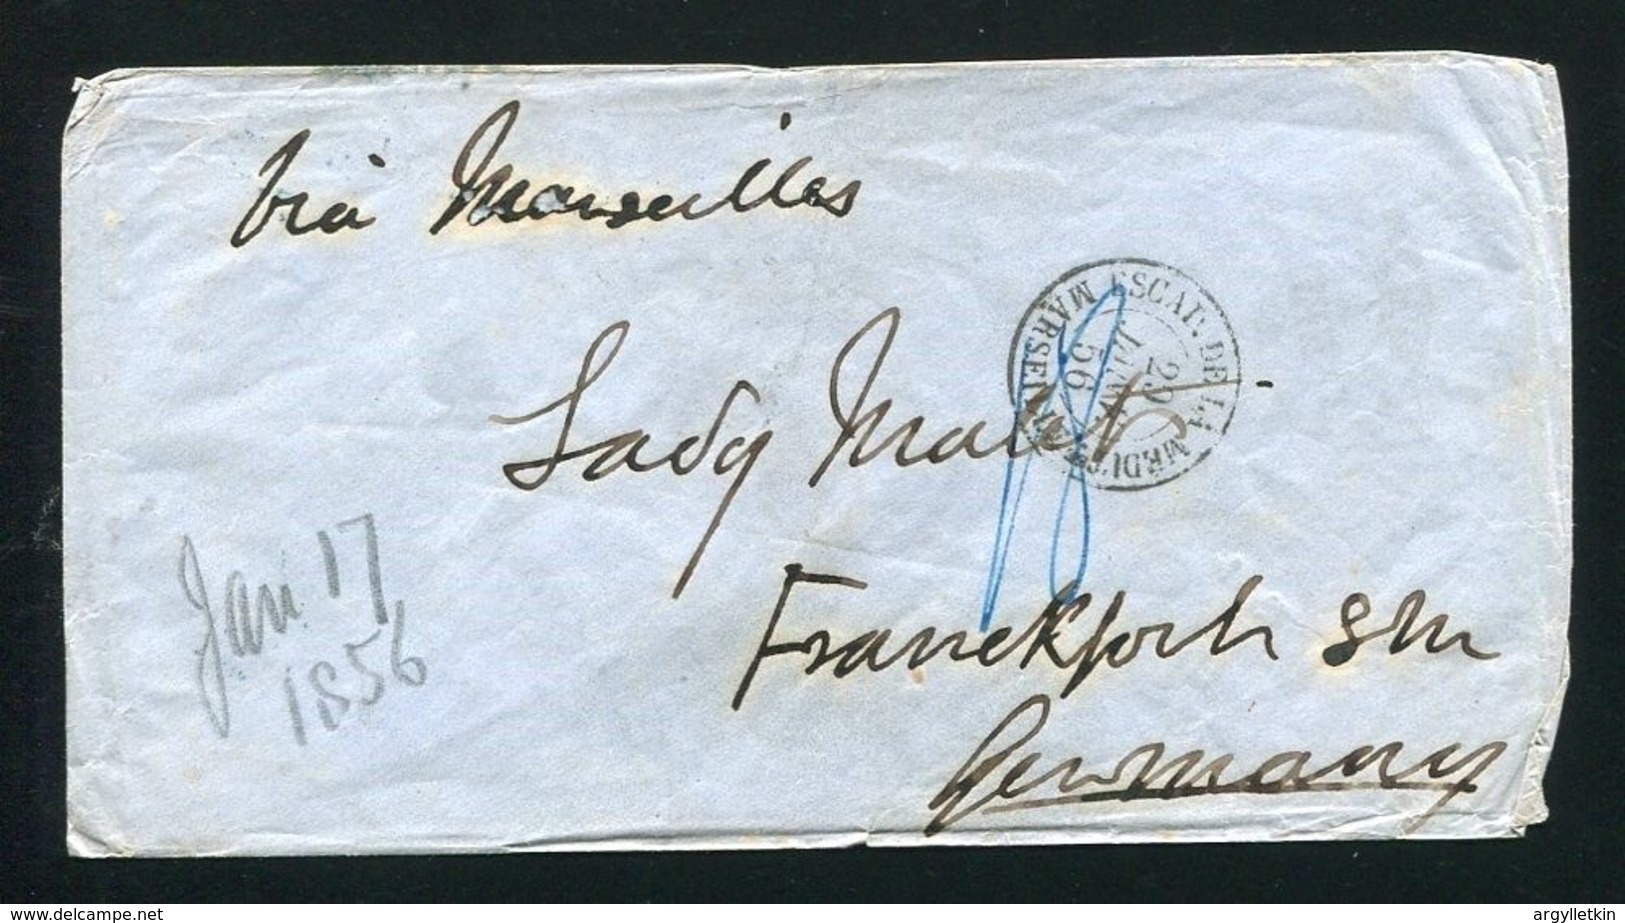 GREAT BRITAIN FRANCE GERMANY CRIMEAN WAR 1856 BRITISH ARMY FRENCH NAVY - Postmark Collection